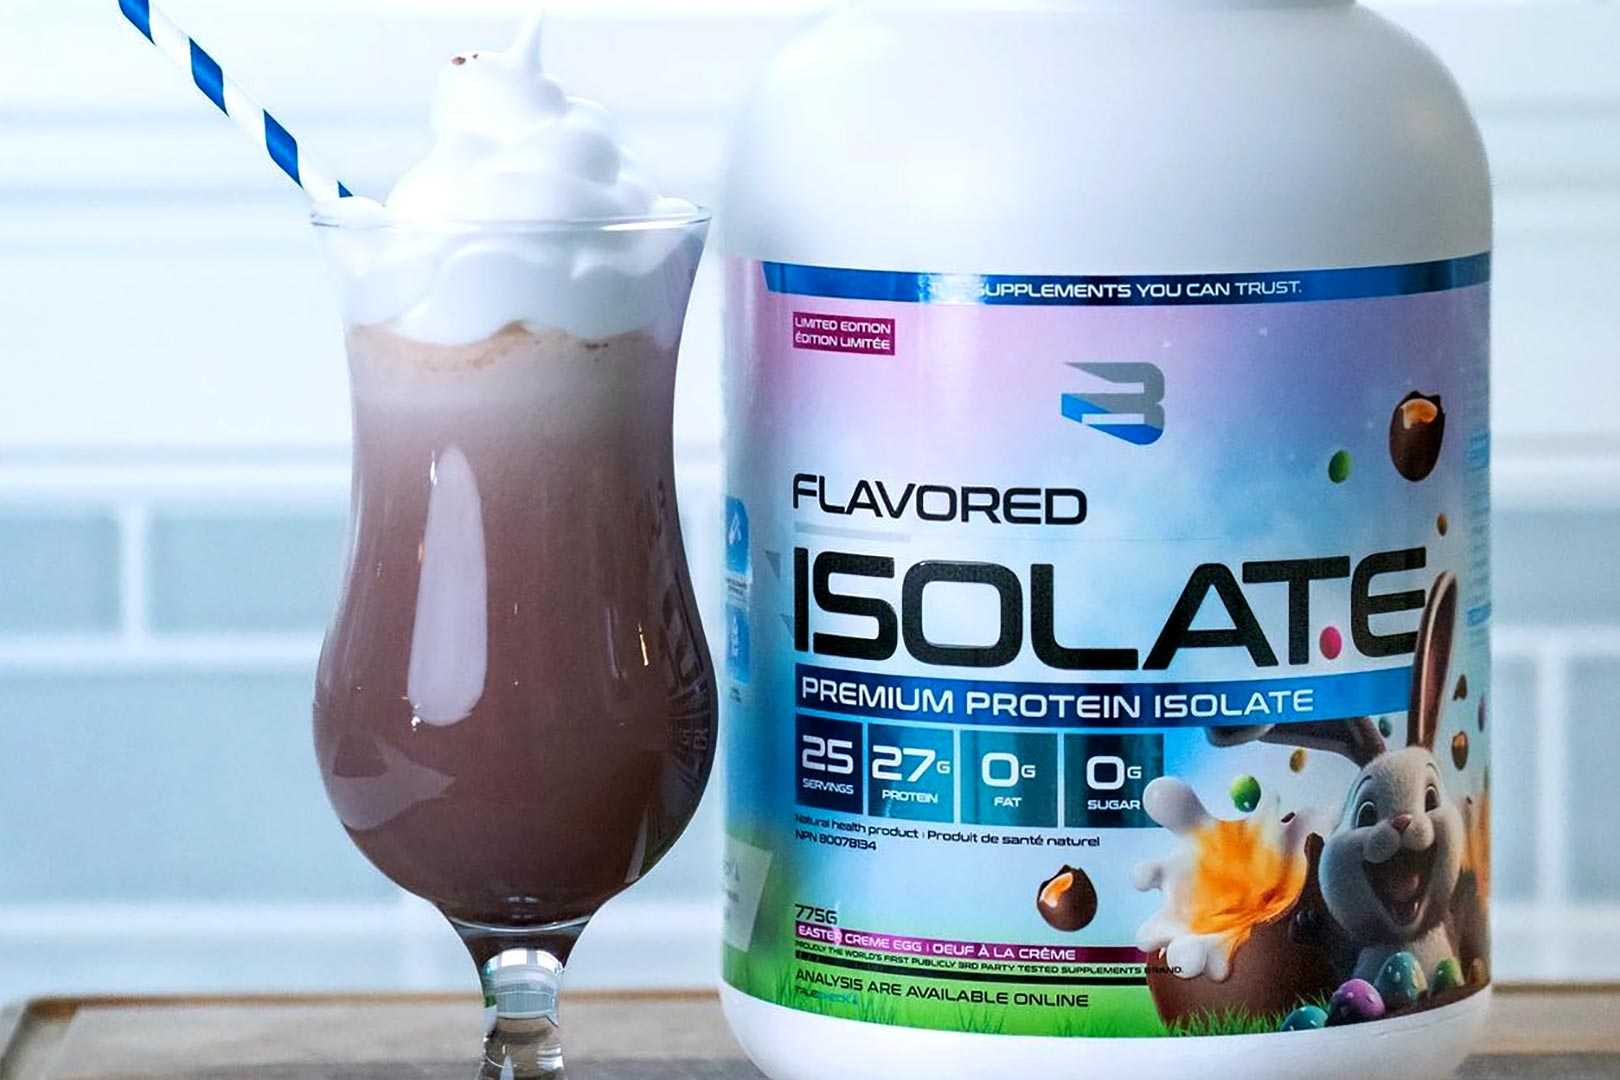 Believe Creme Egg Flavored Isolate